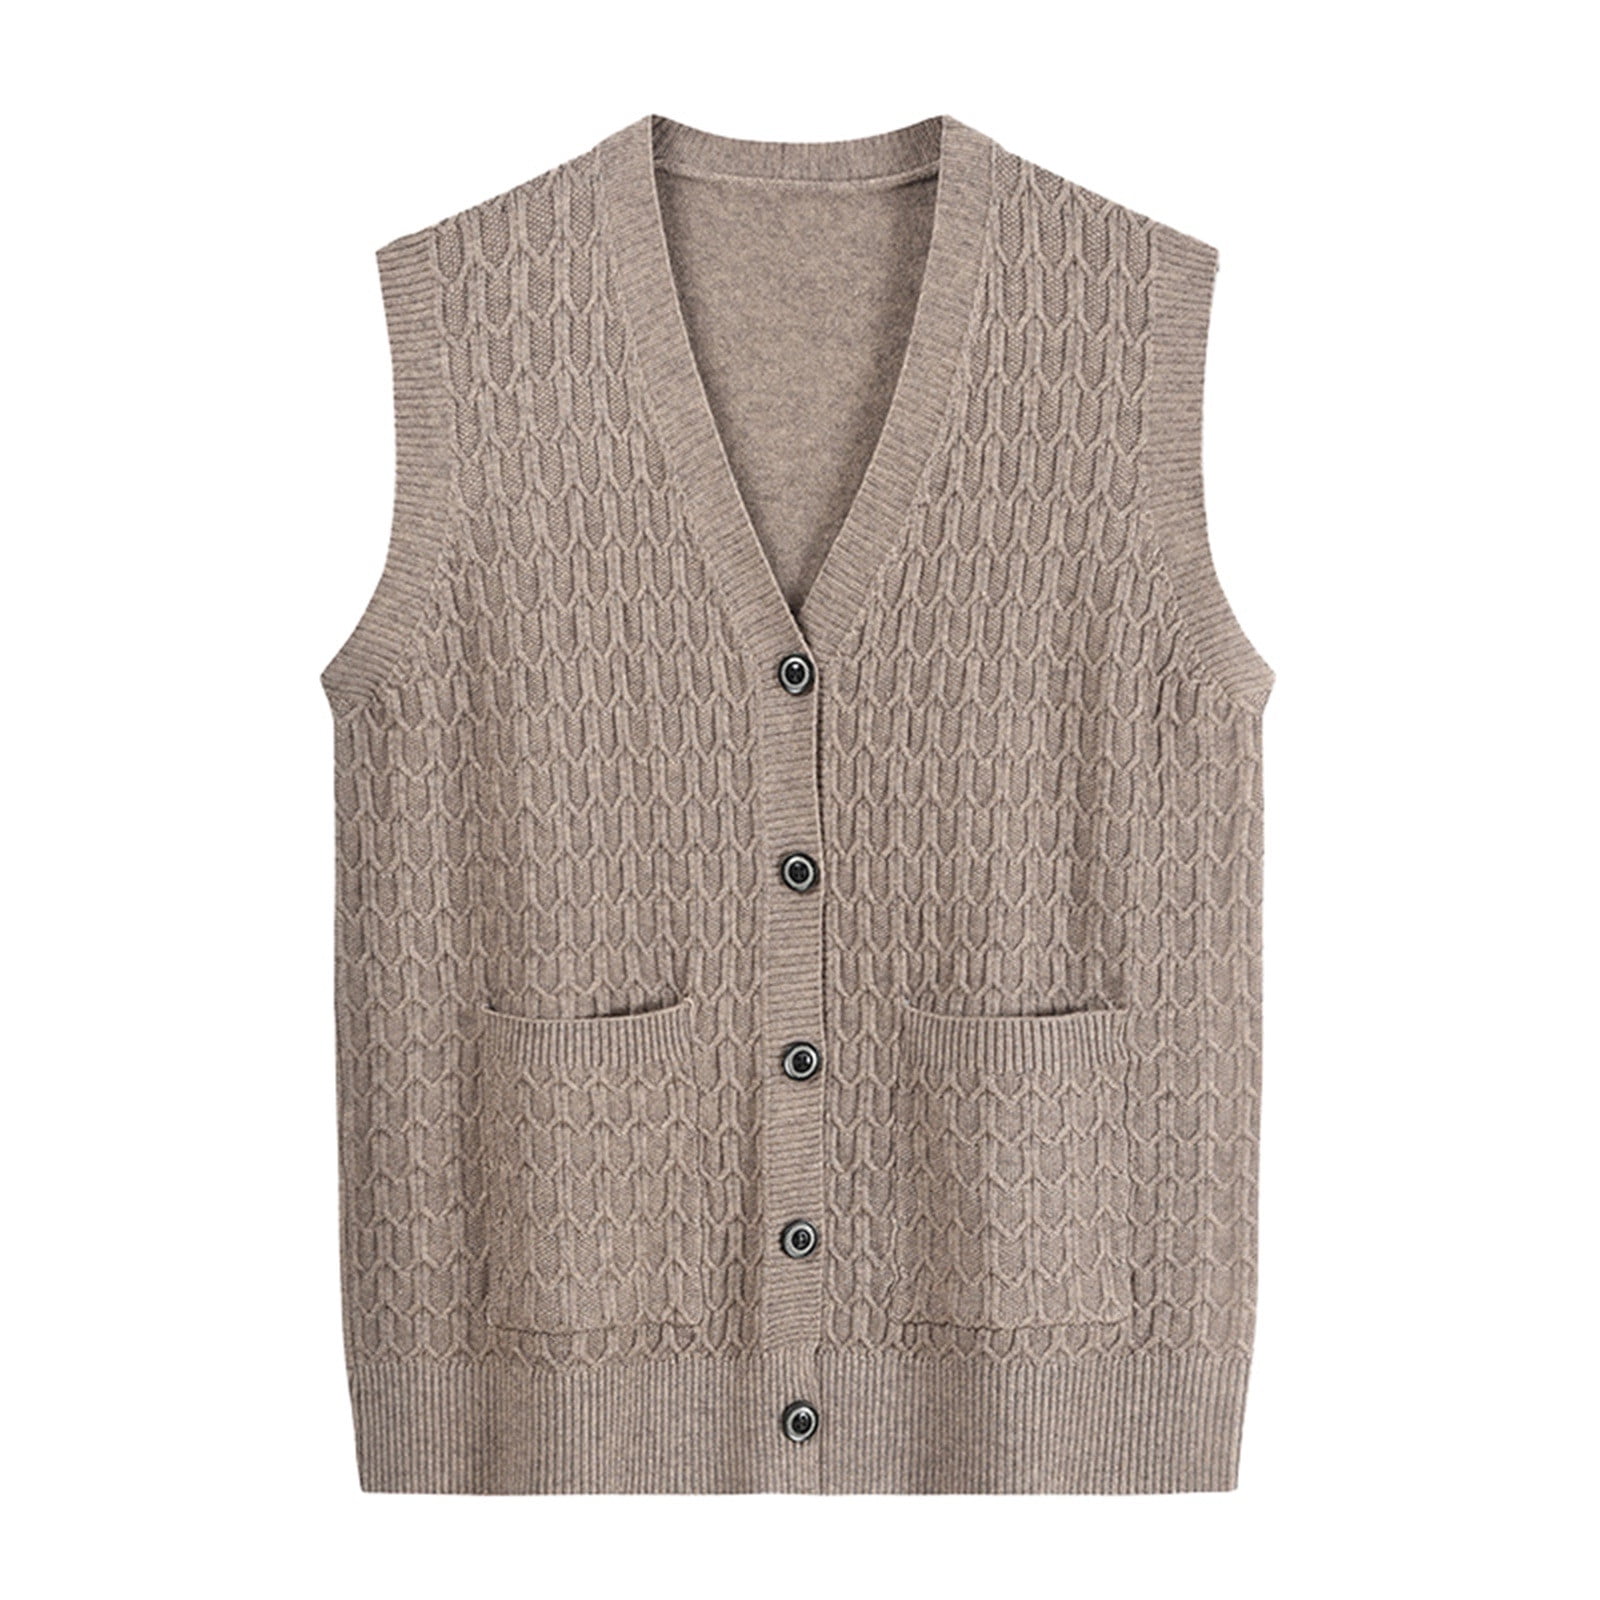 Wotryit Women V Neck Cardigan Sweater Vest Sleeveless Outerwear Knitted  Single Button Down Sweater Vest Womens Sweaters (Color: Khaki,Size: One  Size )